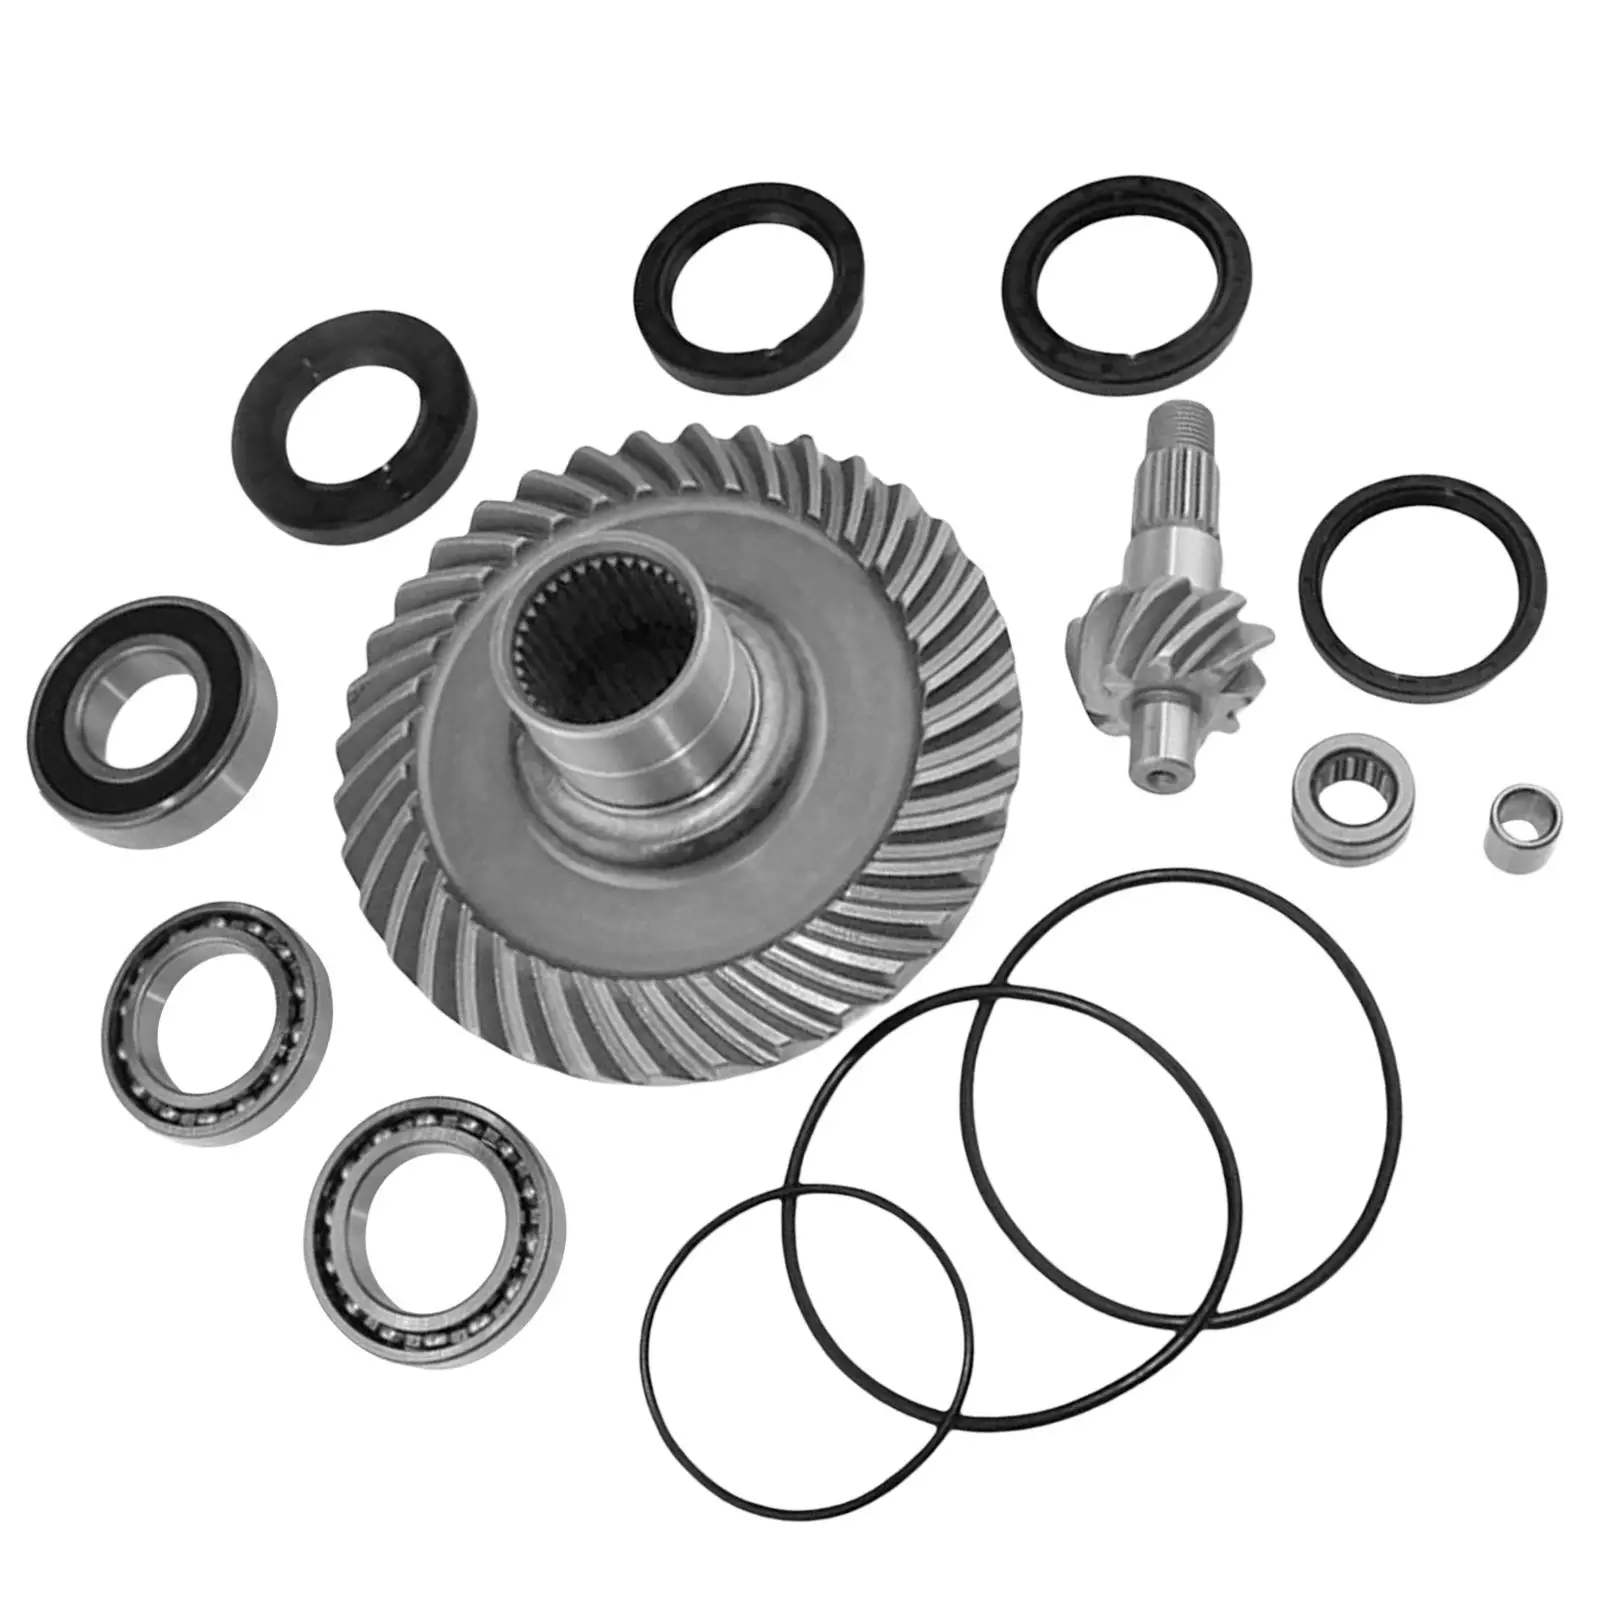 Rear Differential Ring+Pinion Gear+Bearing 14Pcs/Set Fit for Honda TRX300